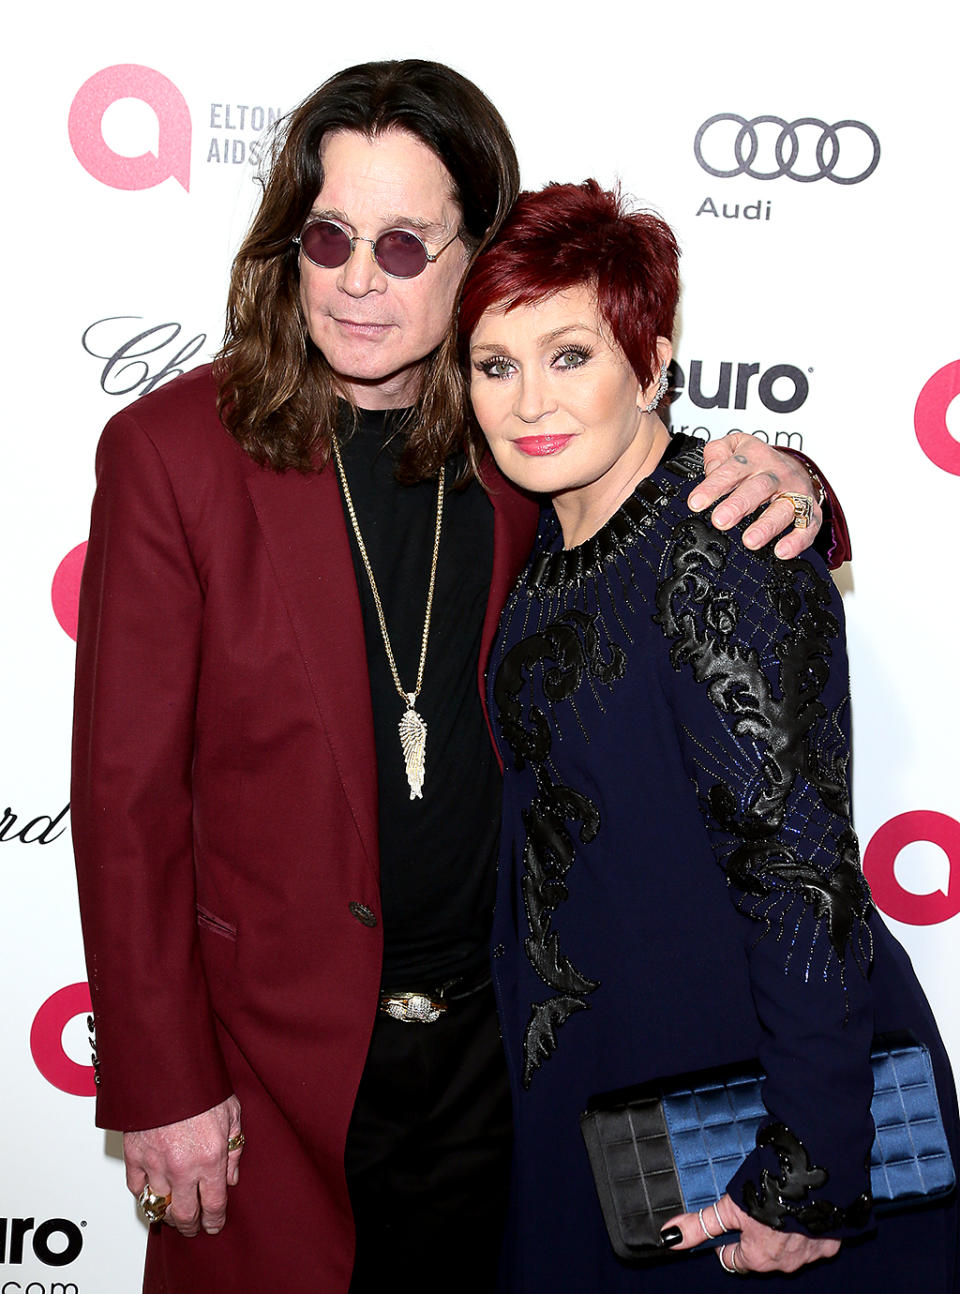 27. Sharon Osbourne temporarily breaks up with Ozzy after he admits to affair